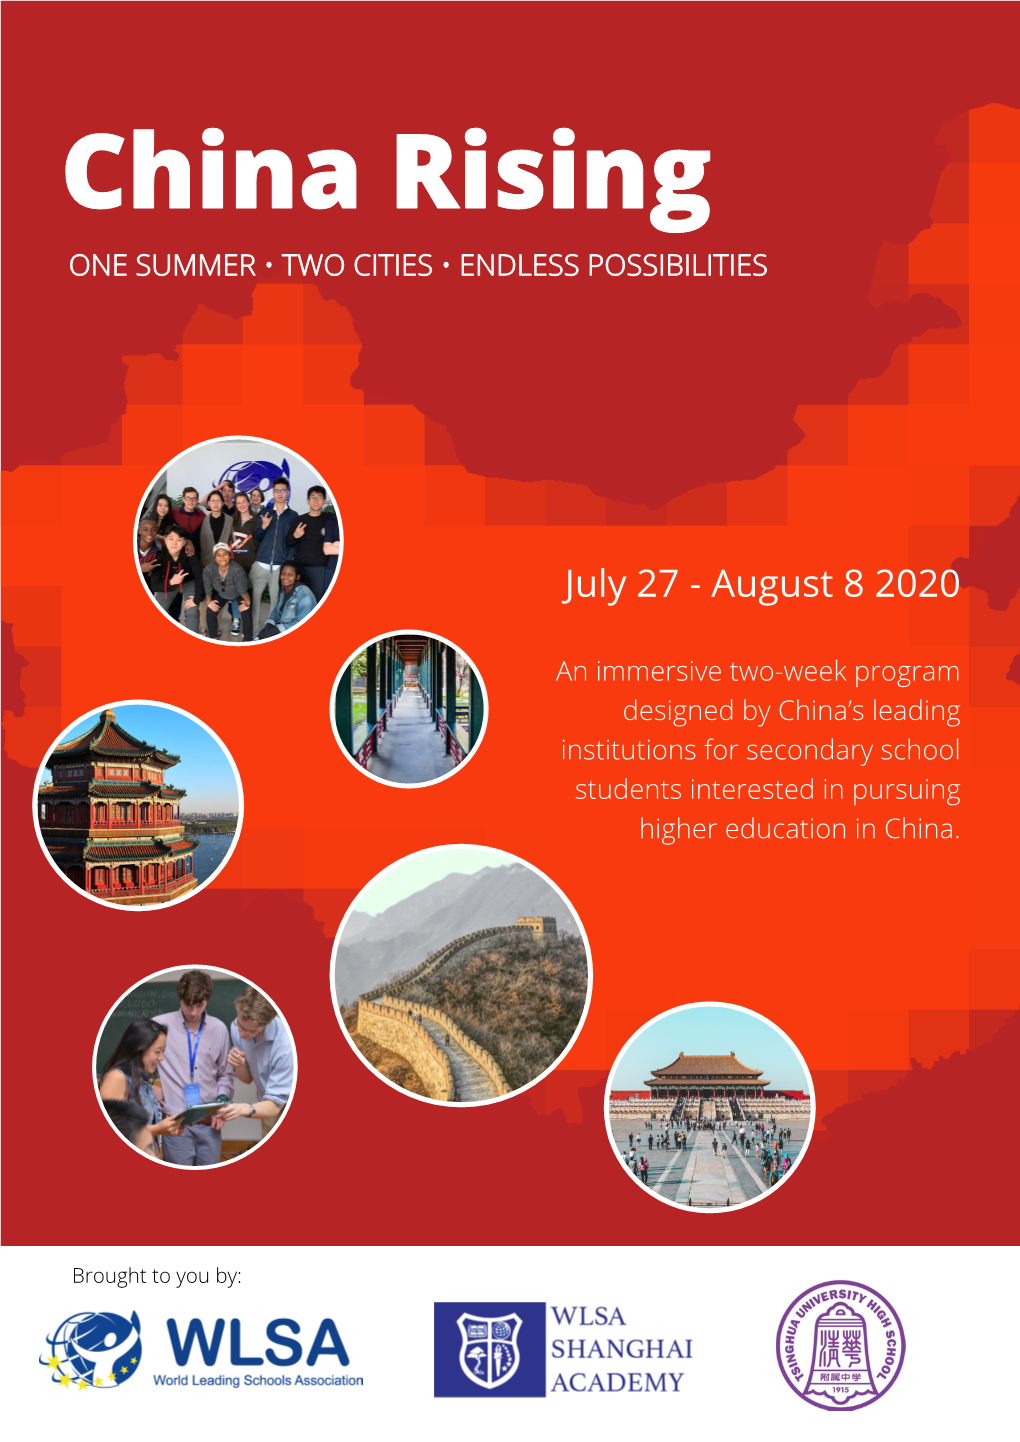 China Rising ONE SUMMER • TWO CITIES • ENDLESS POSSIBILITIES